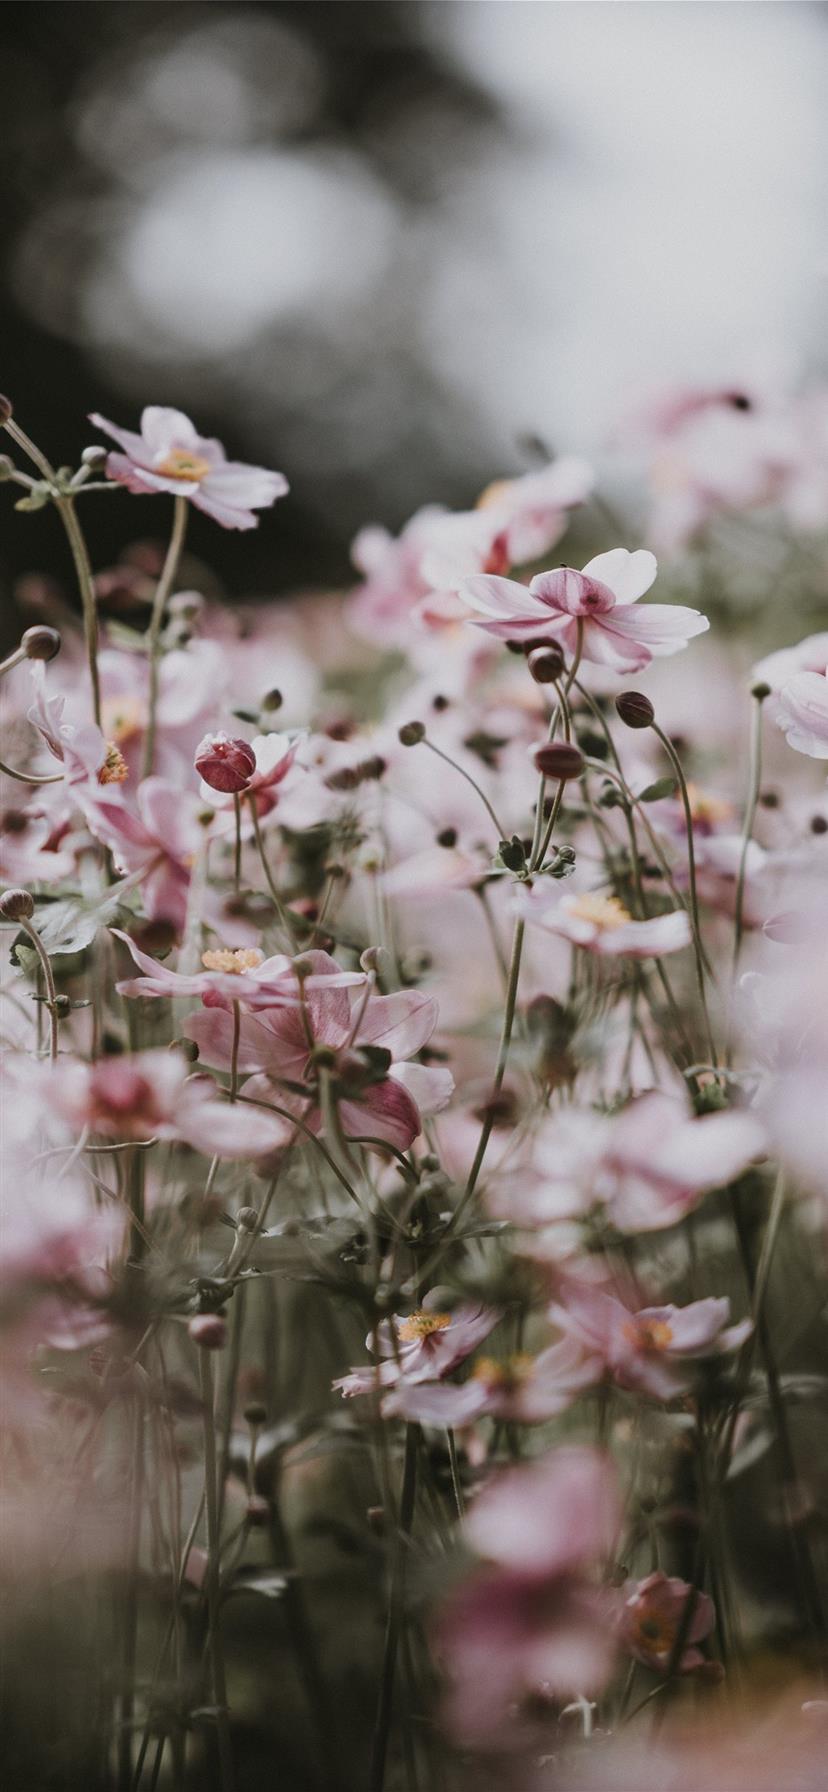 A close up of some flowers in the grass - Pastel pink